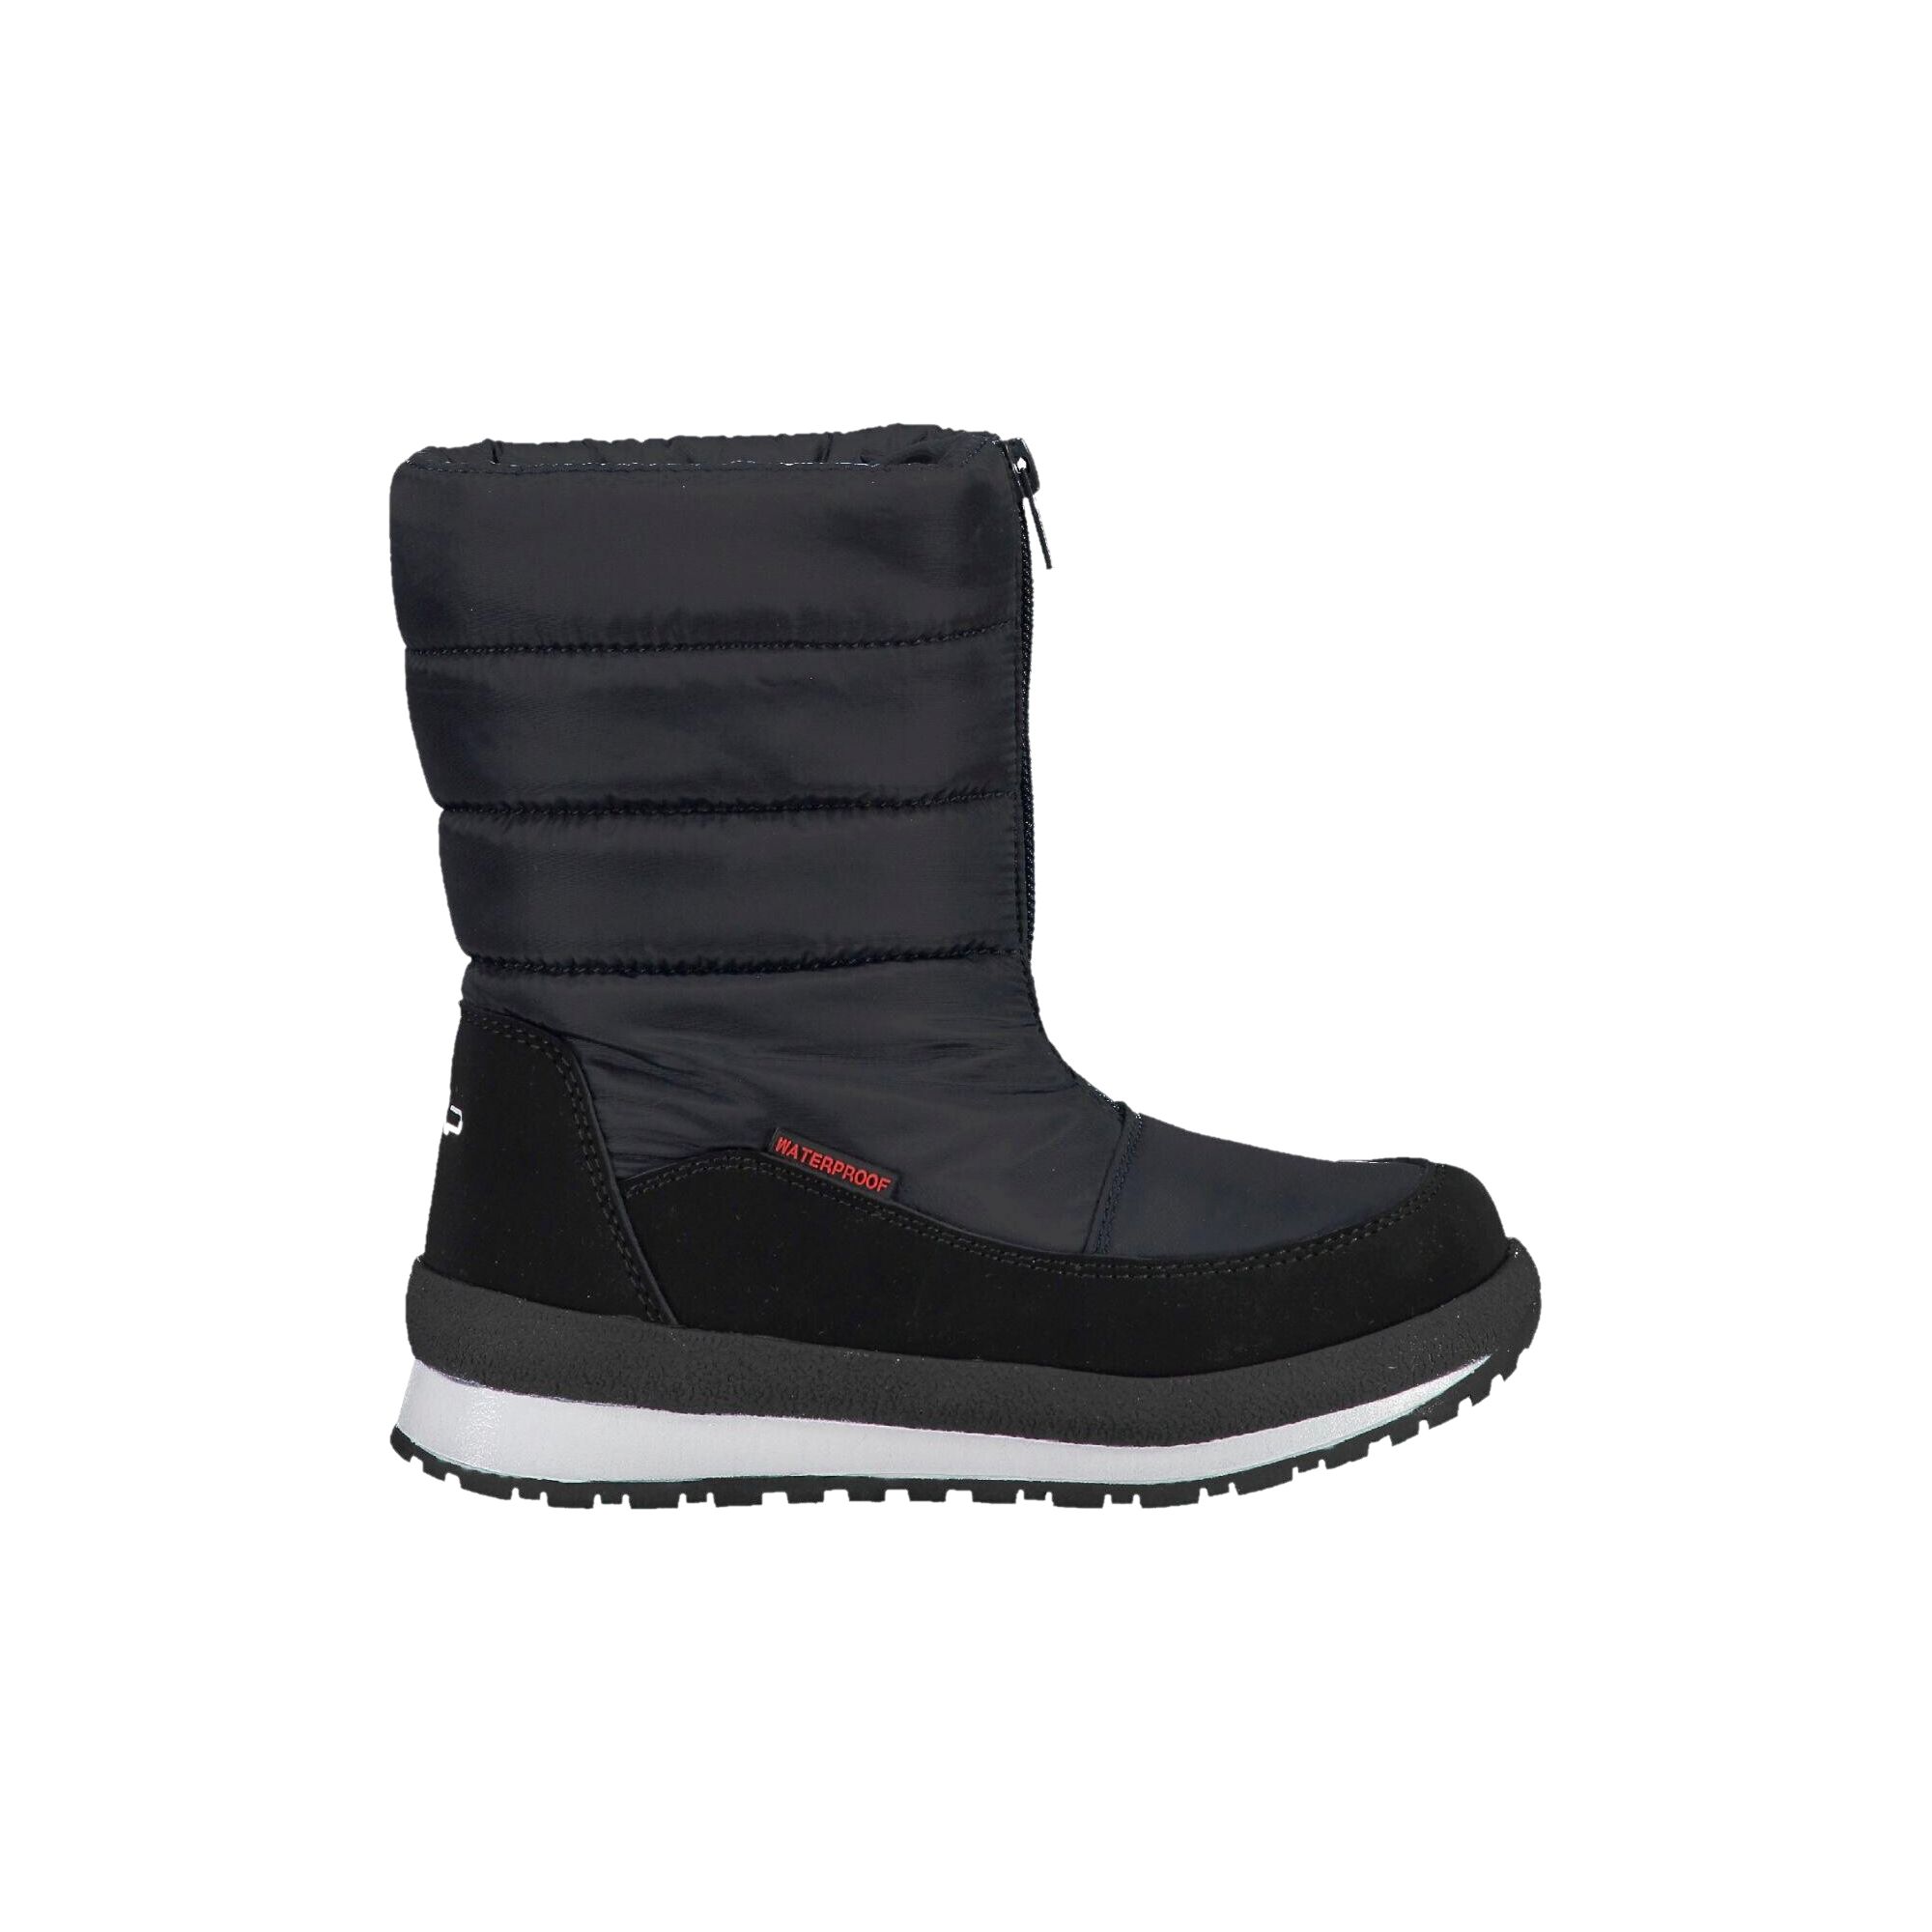 KIDS RAE SNOW BOOTS WP